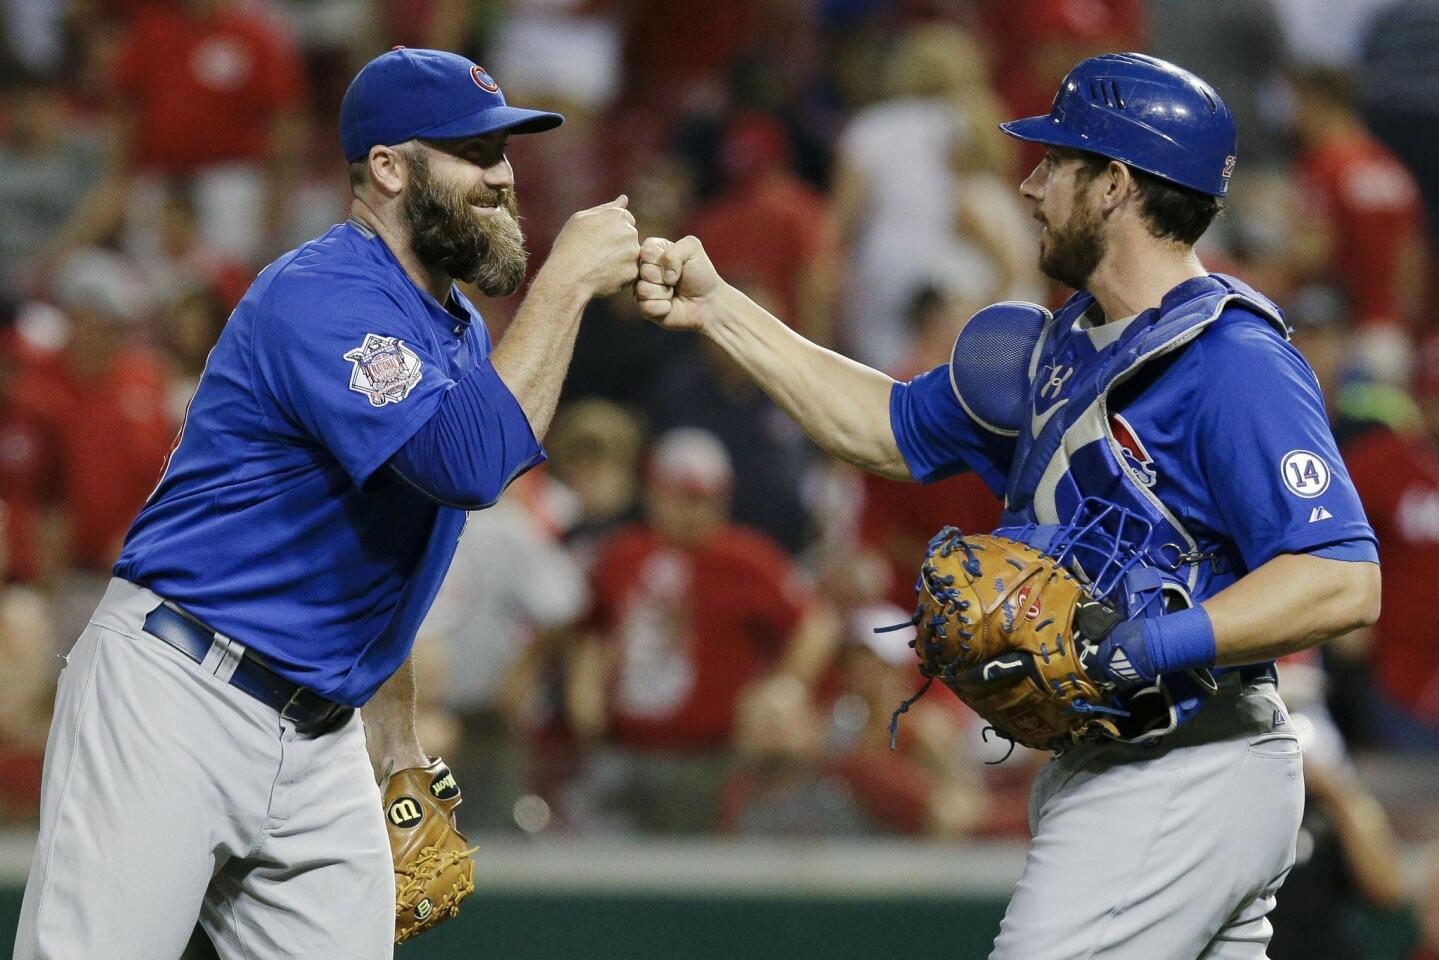 Jason Motte celebrates with catcher Taylor Teagarden after the Cubs' 6-5 win.